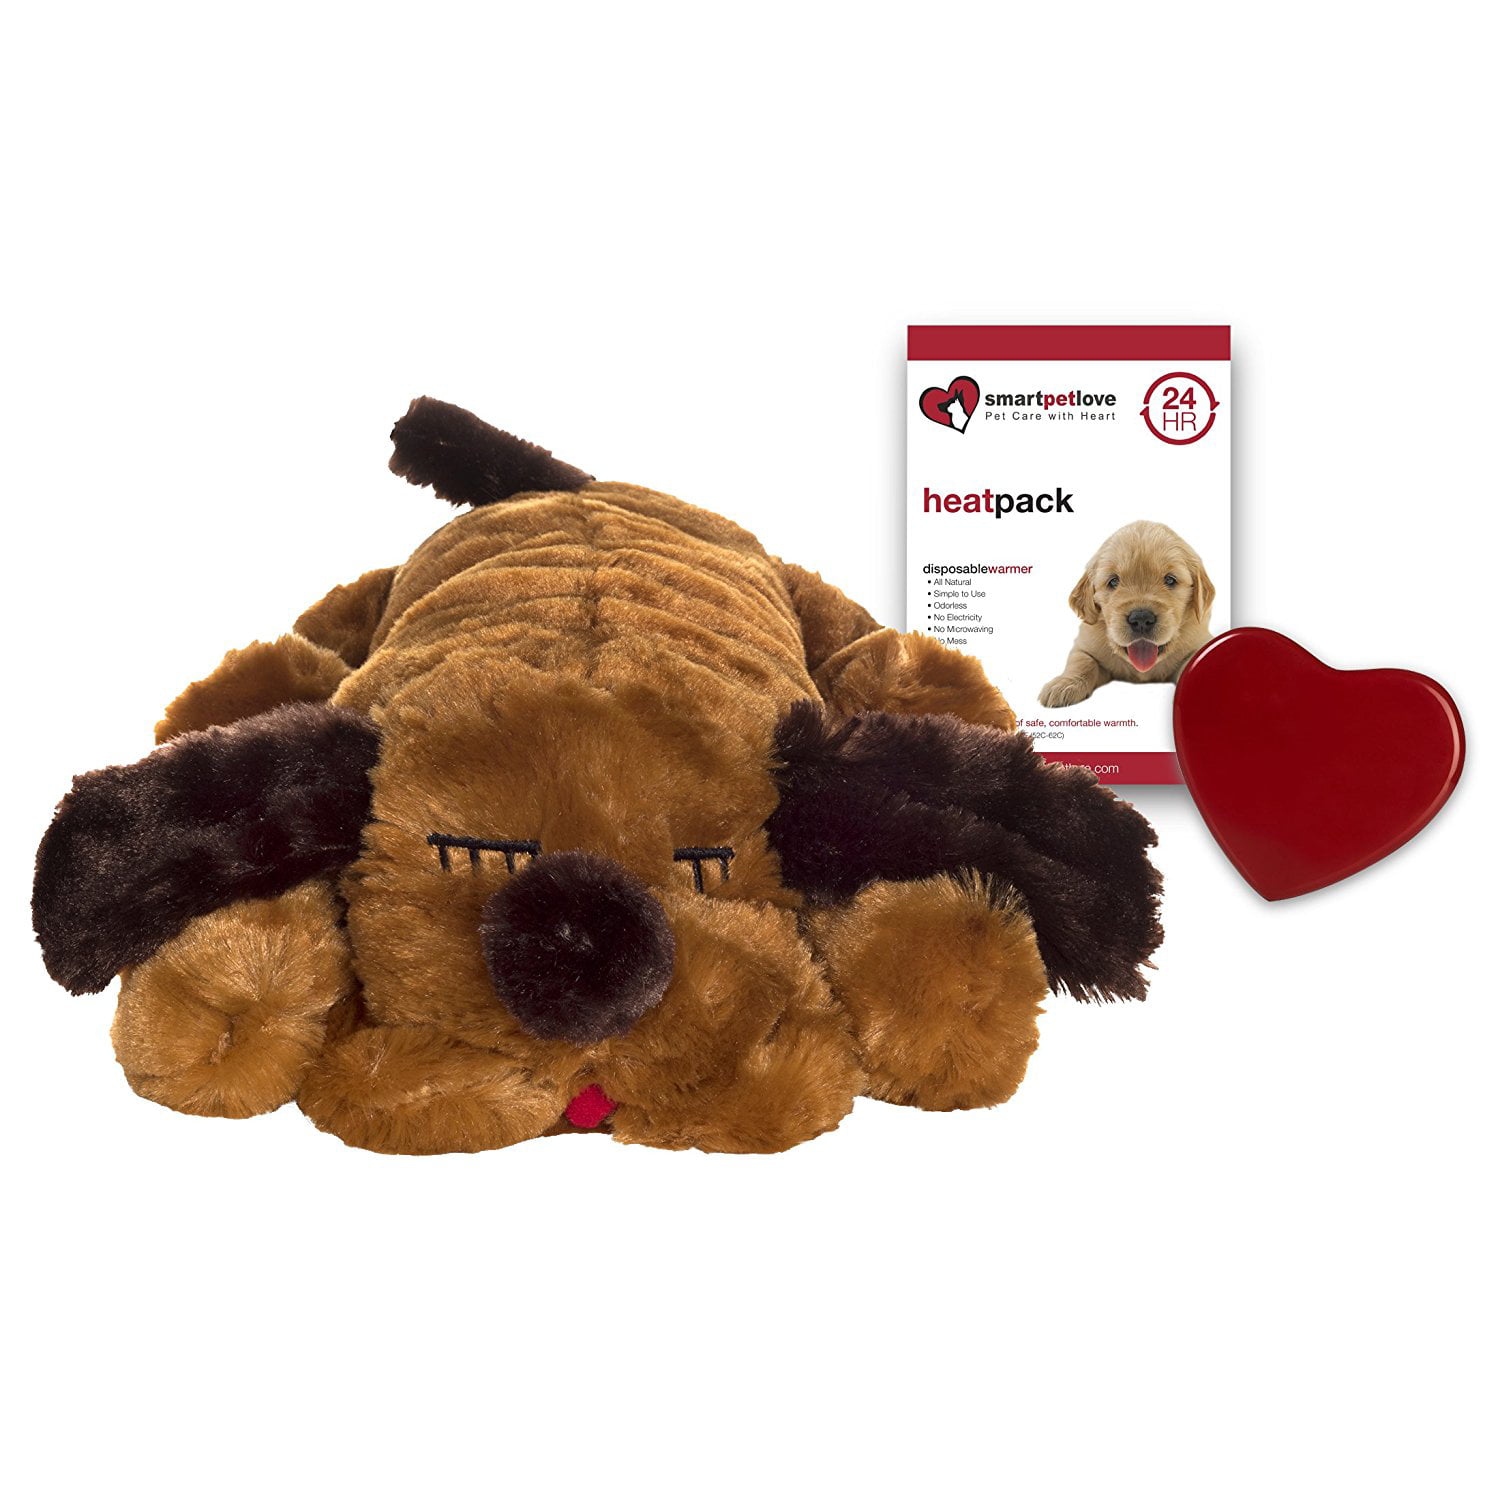 stuffed puppy with heartbeat